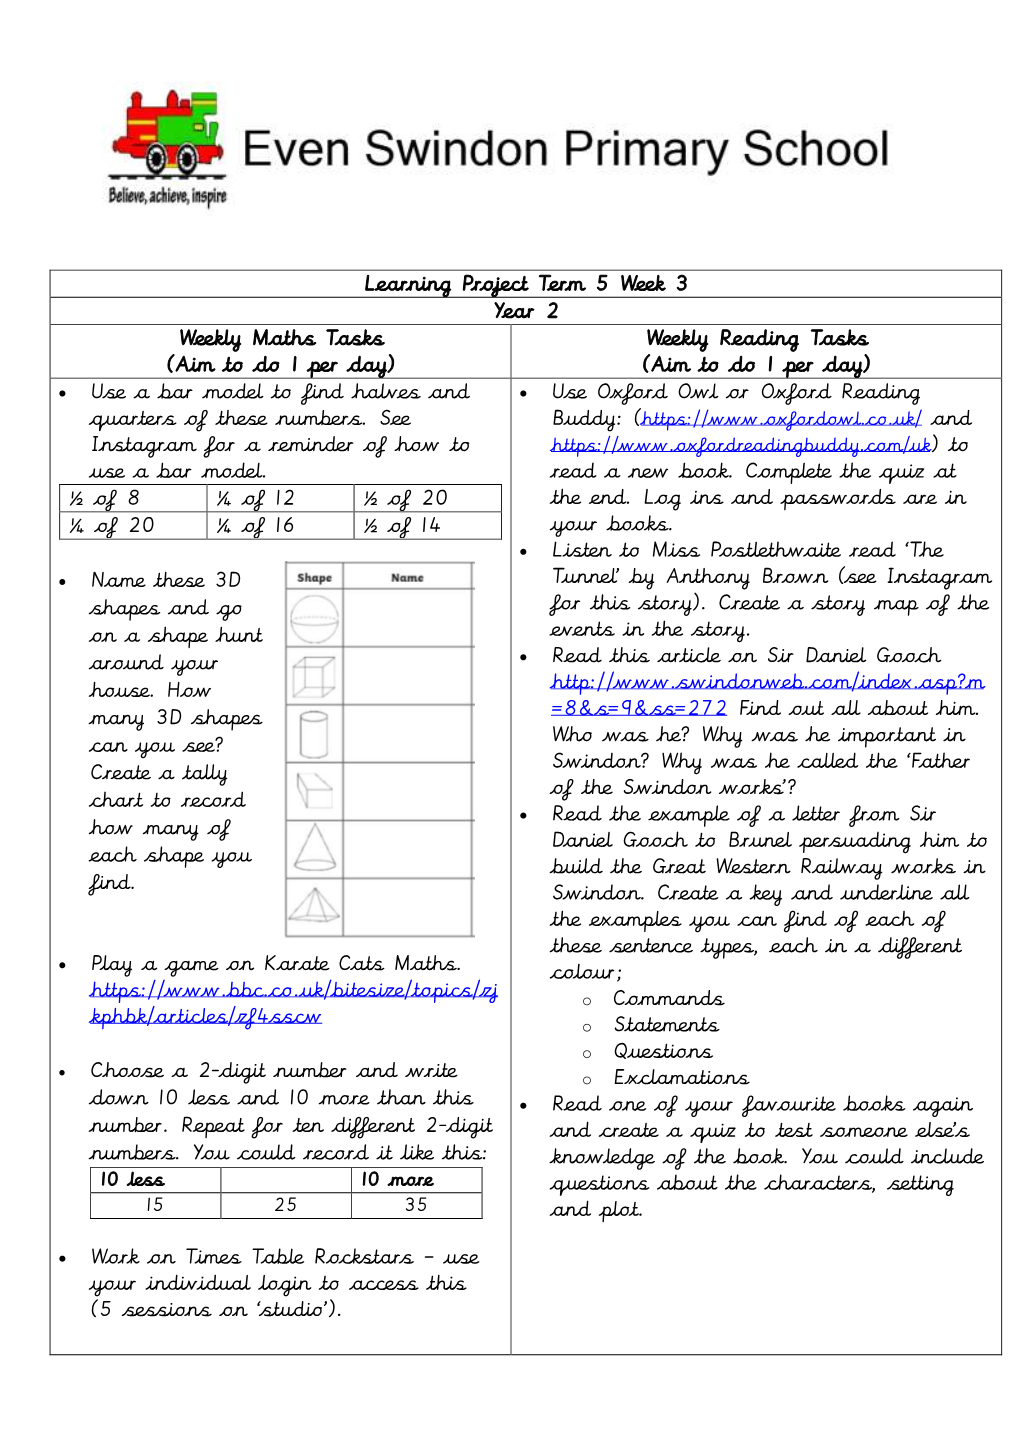 Learning Project Term 5 Week 3 Year 2 Weekly Maths Tasks (Aim to Do 1